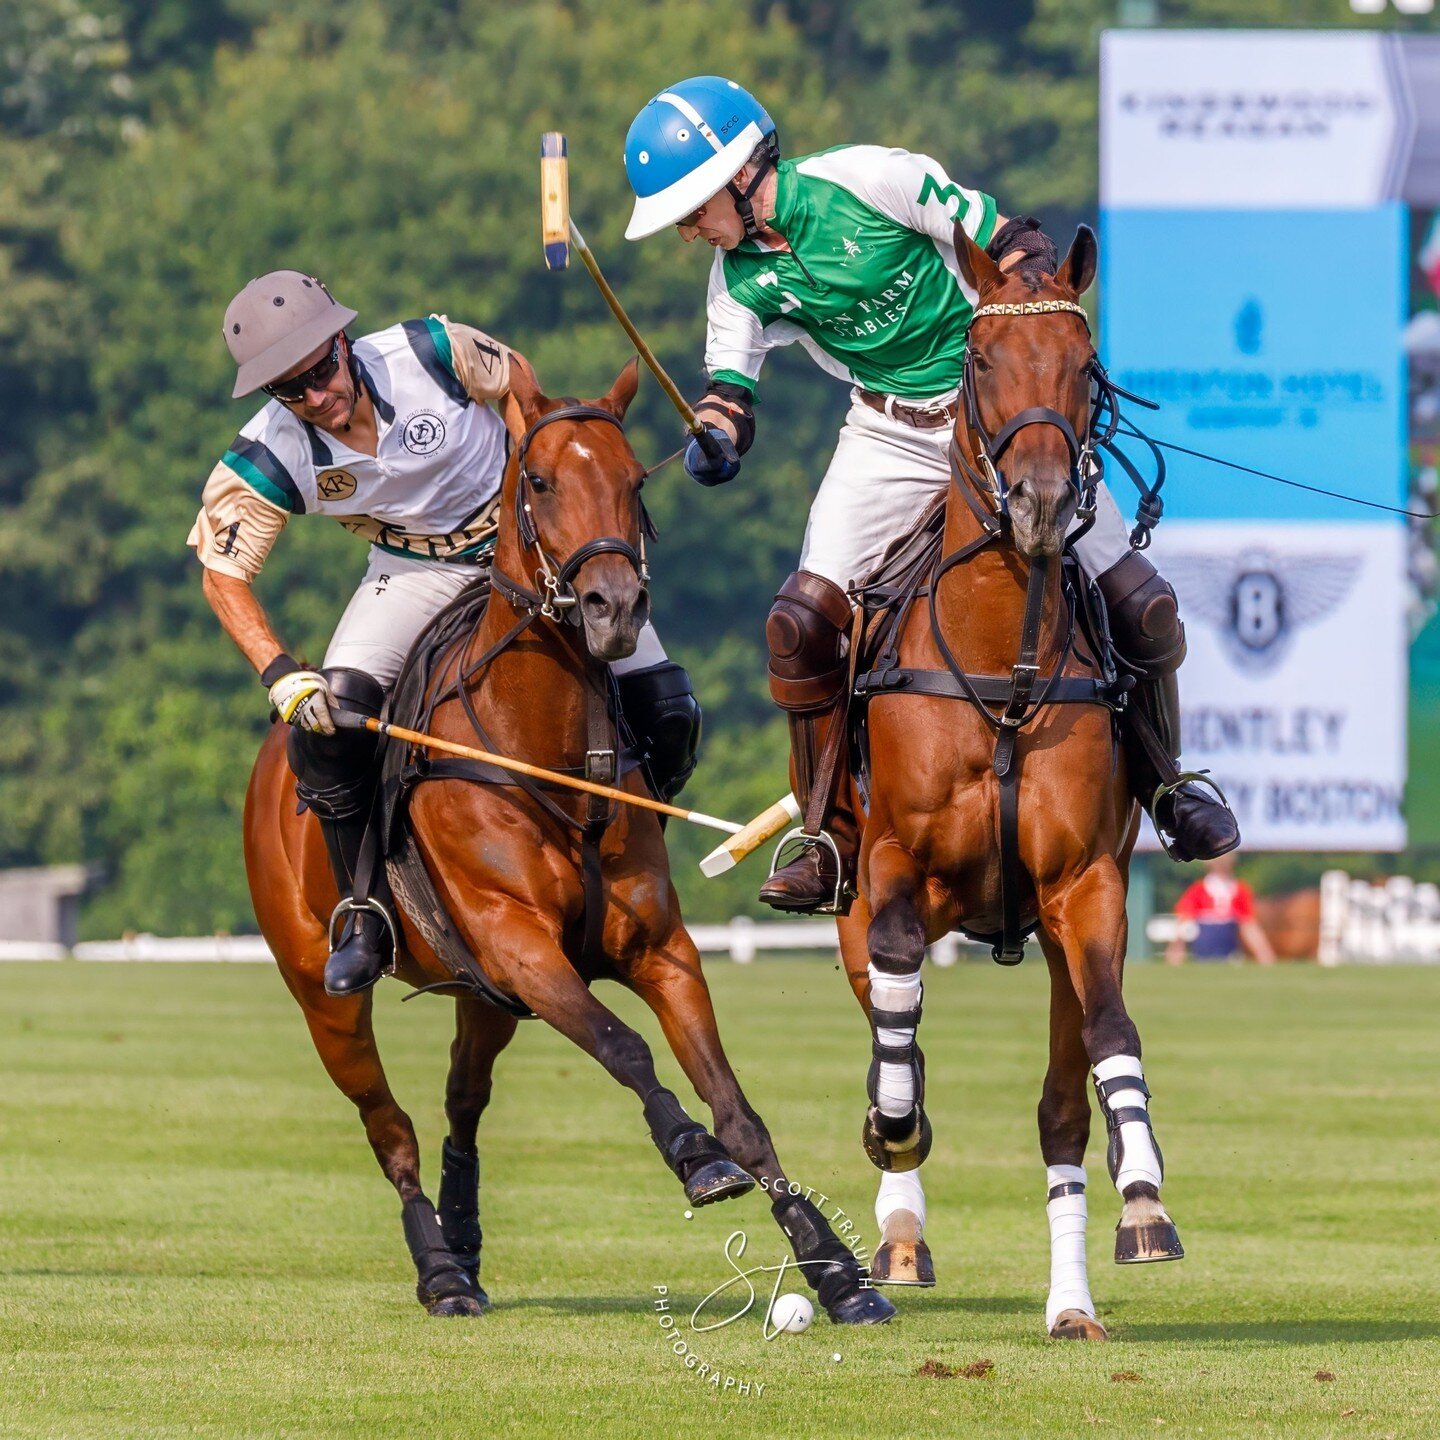 More photos from this week's Independence cup are now on the website at:
https://buff.ly/3rlo8TZ
 @newportpolo #polo  #newportri #portsmouthri #polo #newportinternationalpolo #poloponies #equestrian #NewportPolo  #NPTRightNow